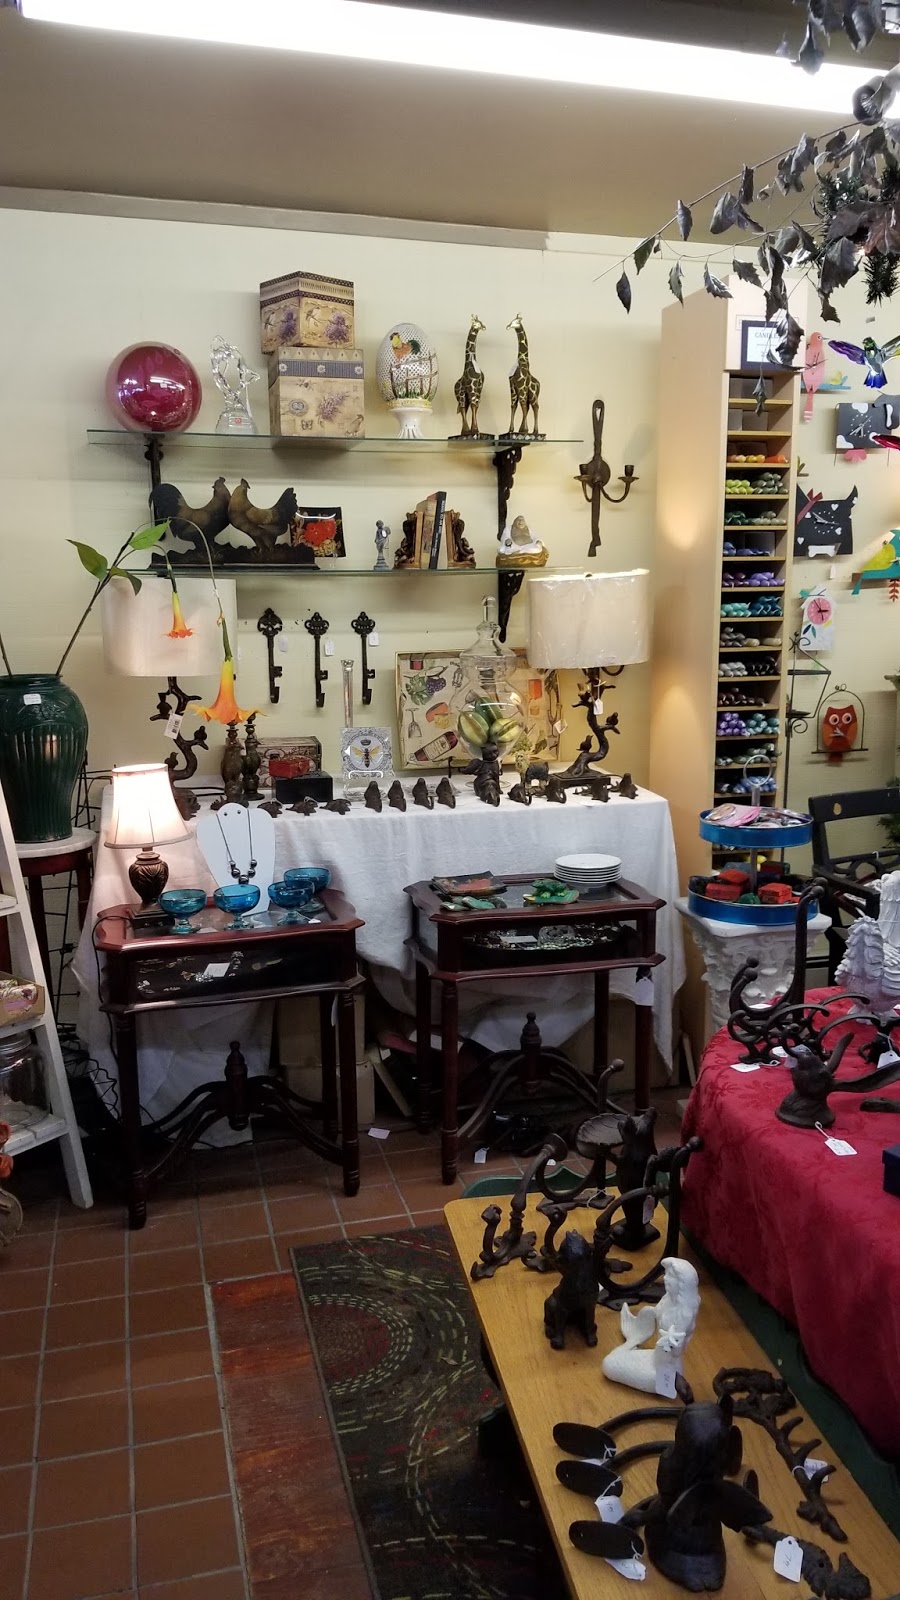 English Garden Antiques | 61 S Partition St, Saugerties, NY 12477 | Phone: (845) 246-1012